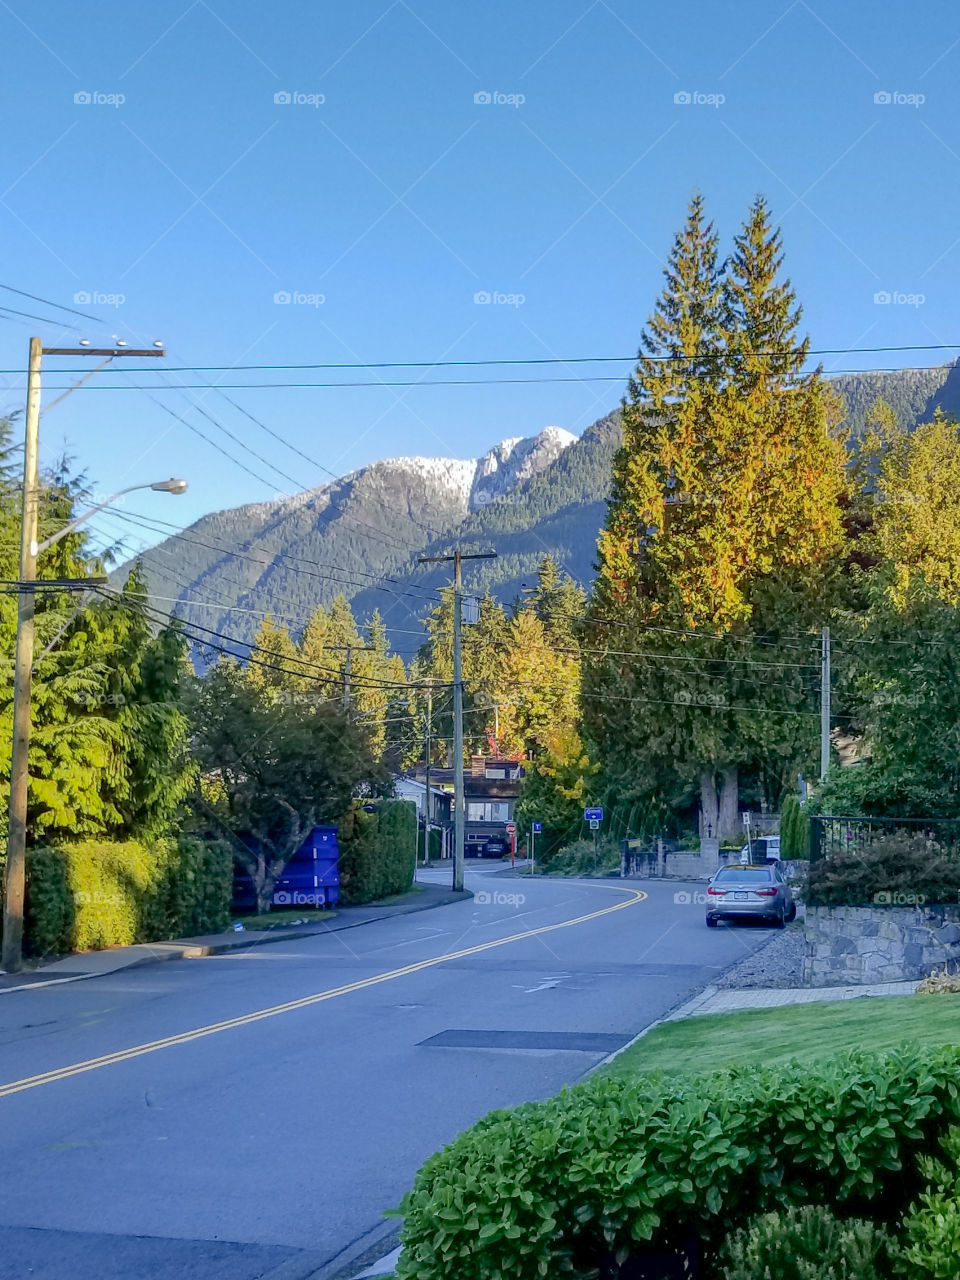 Beautiful morning in North Vancouver looking up at Mt Grouse.